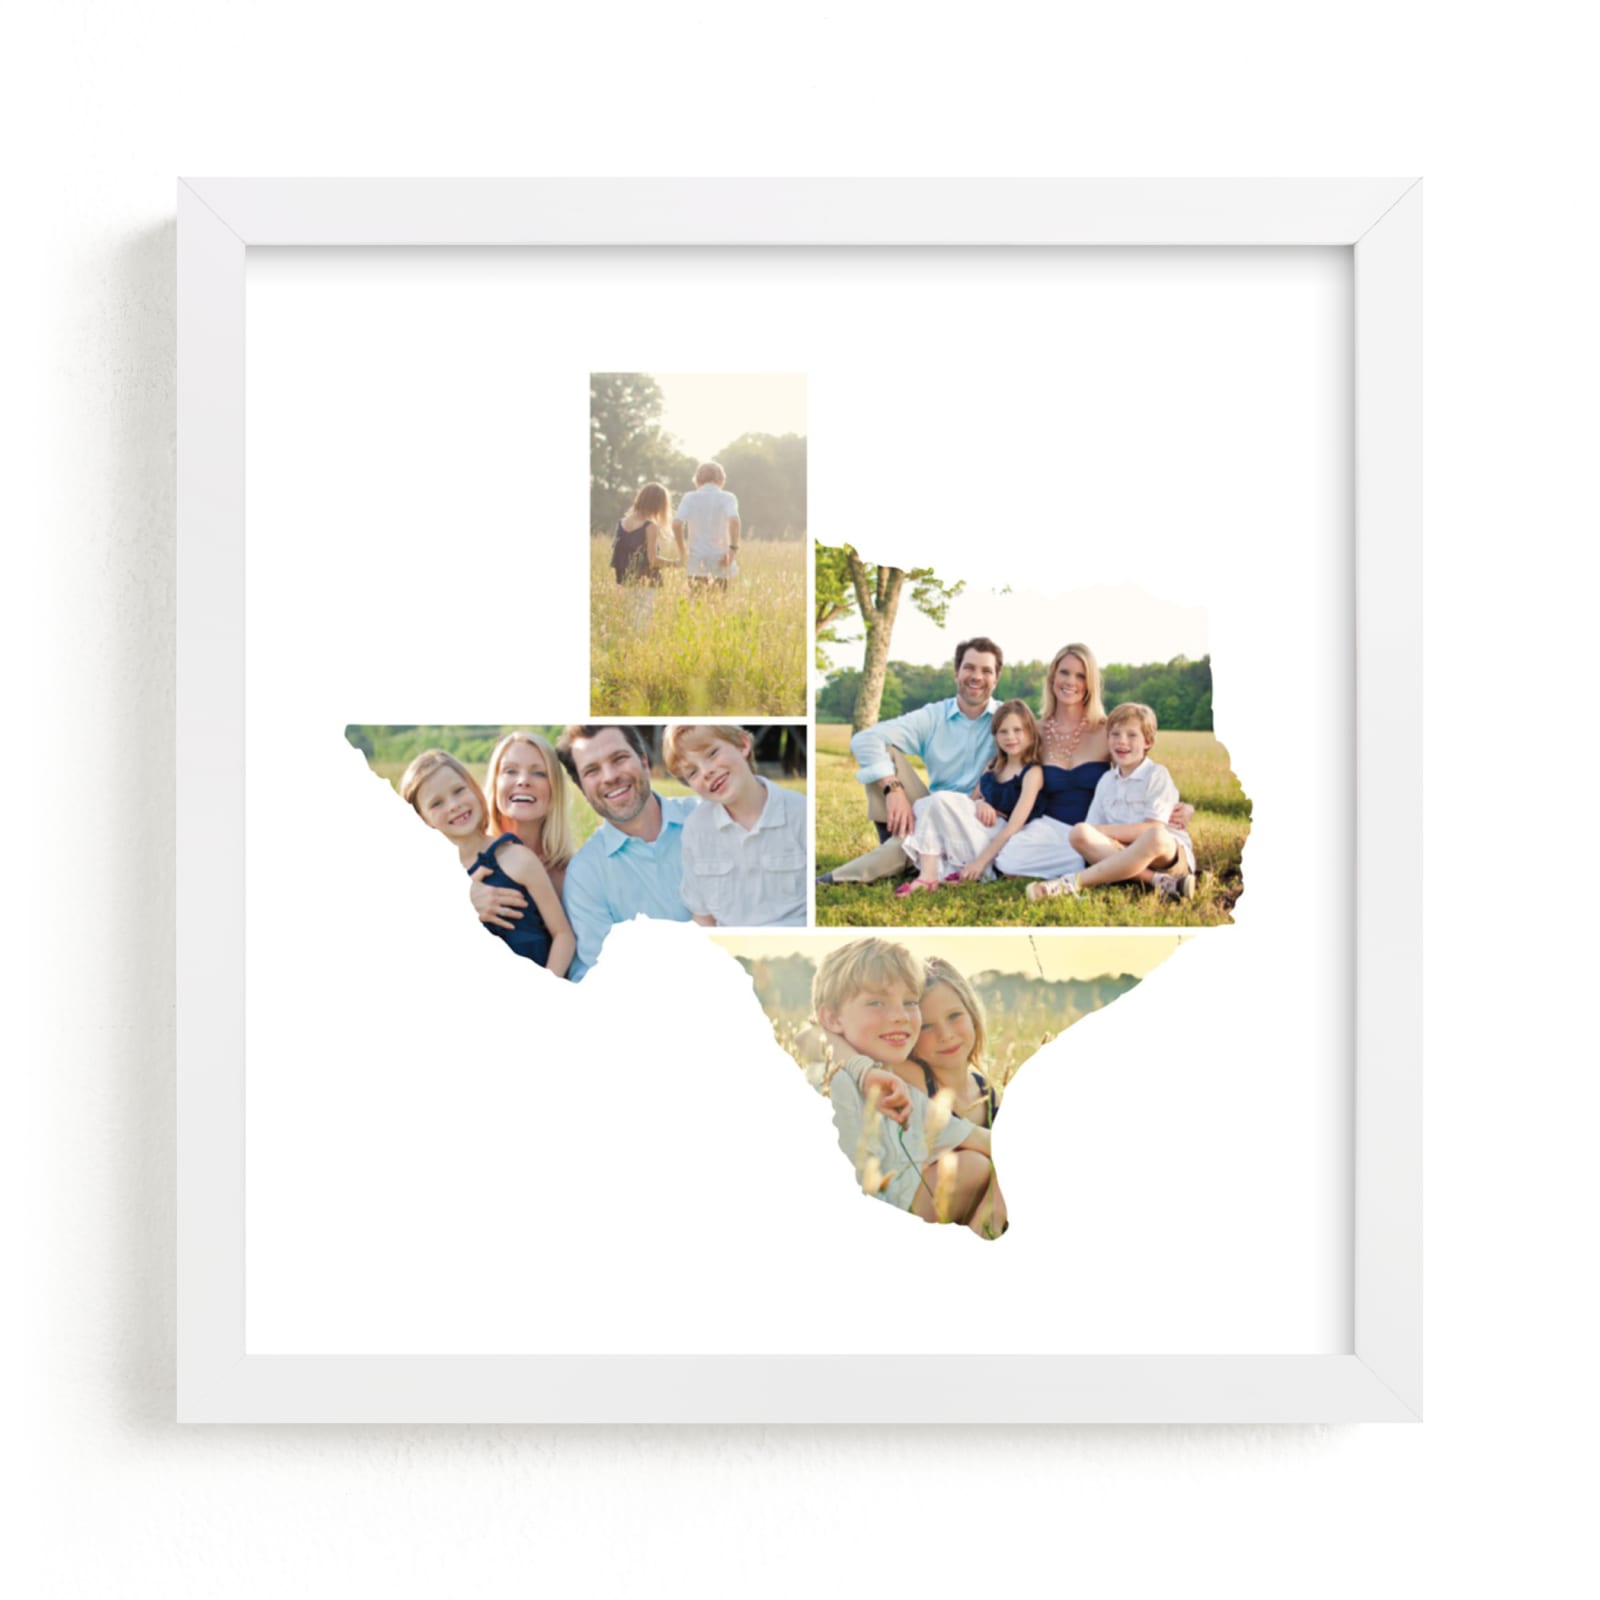 This is a white photo art by Heather Buchma called Texas Love Location.